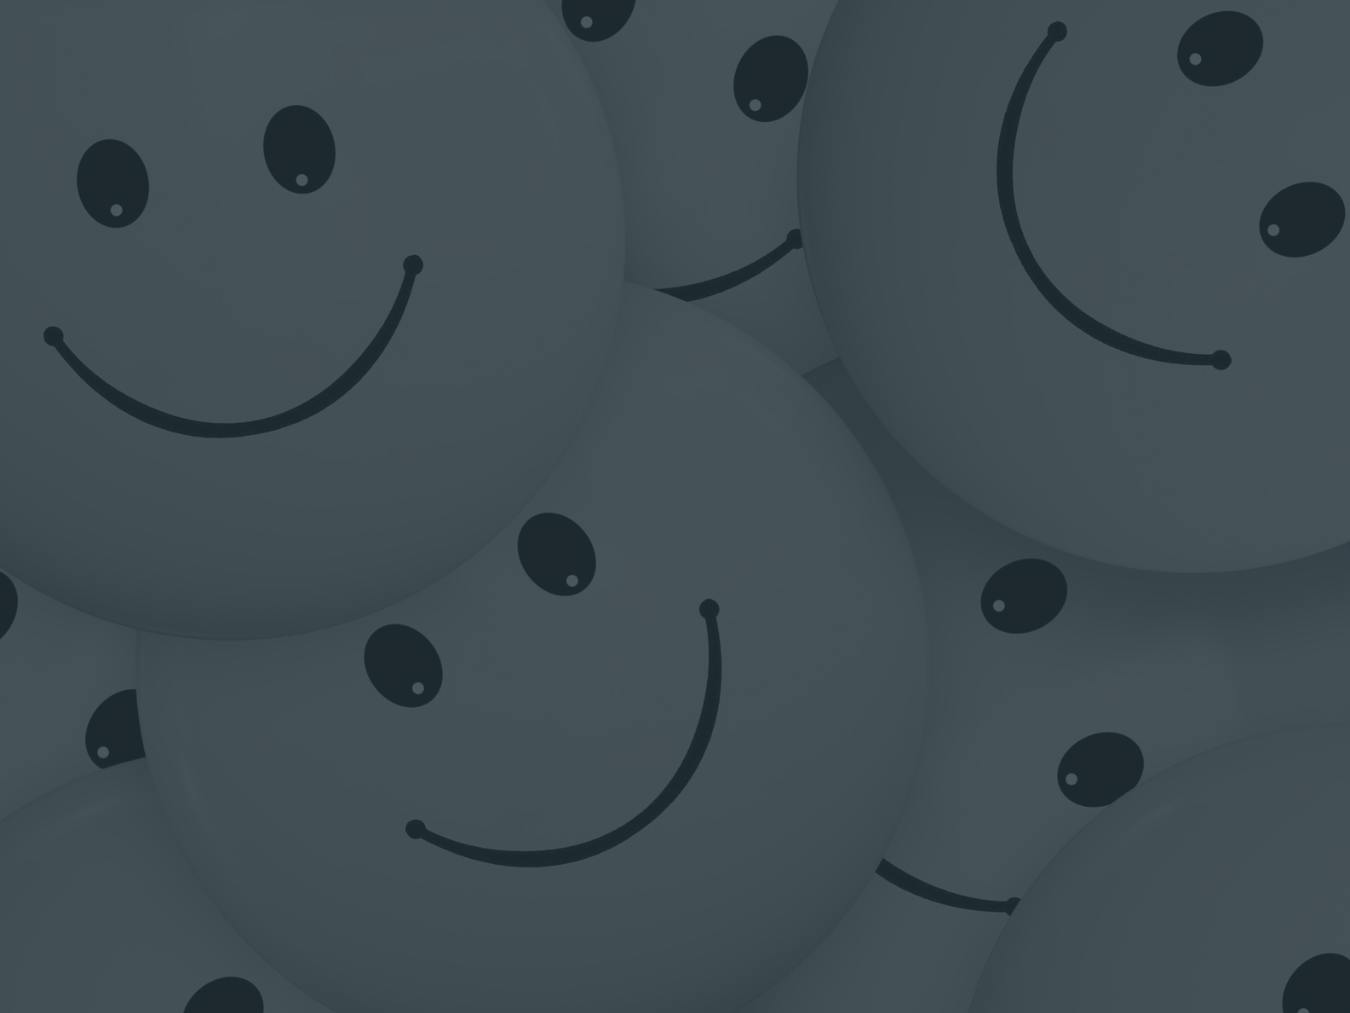 Smiley faces are seen overlapping each other.